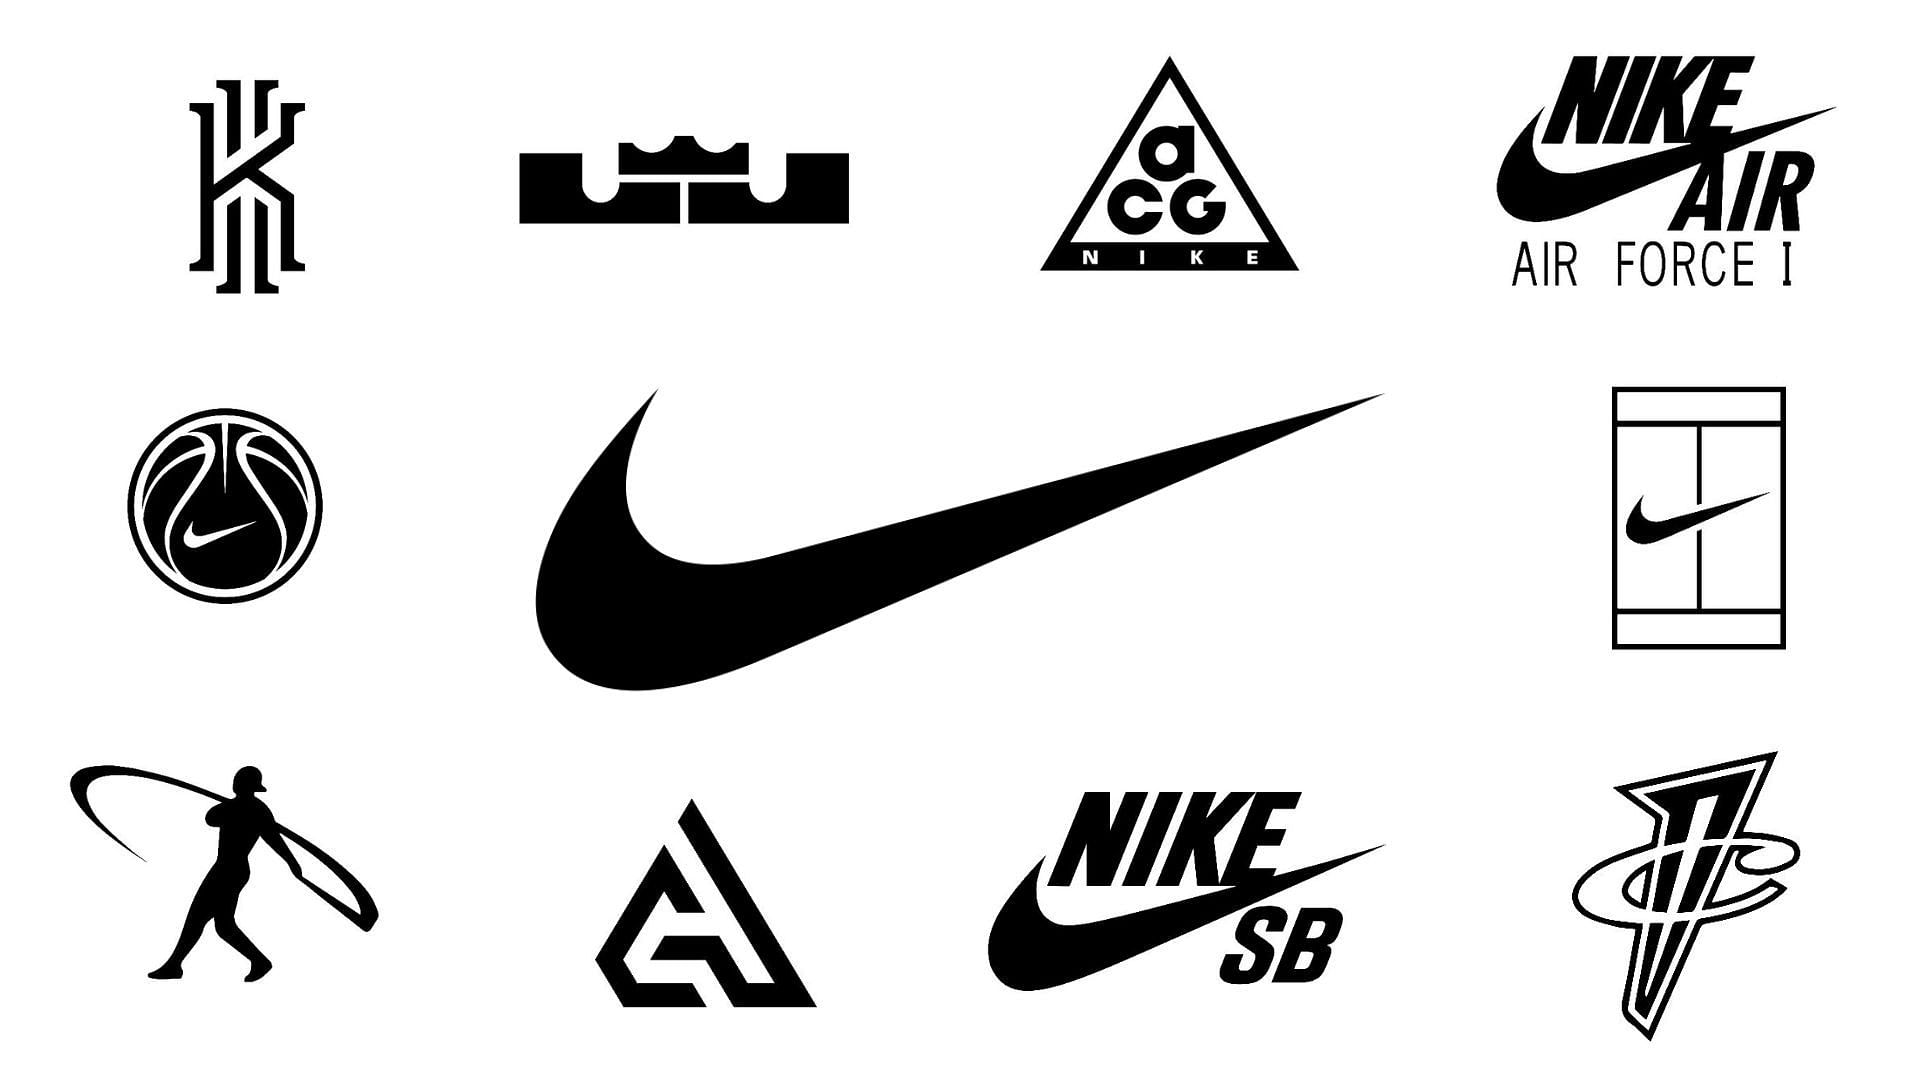 How many kinds of Nike sneakers